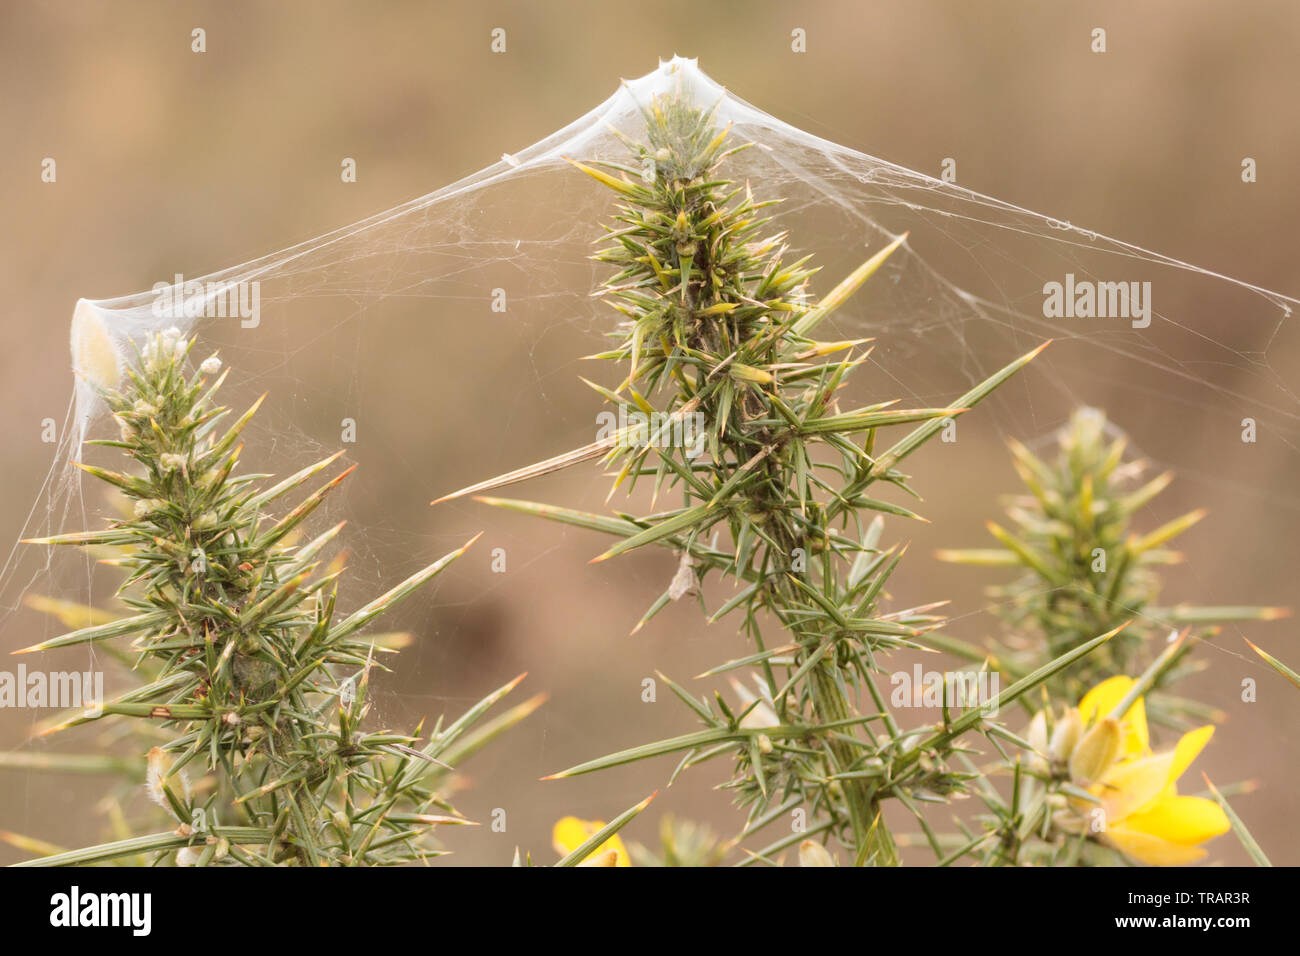 Silk rigging constructed by purse web spiderlings (Atypus affinis) on heathland. Surrey, UK. Stock Photo